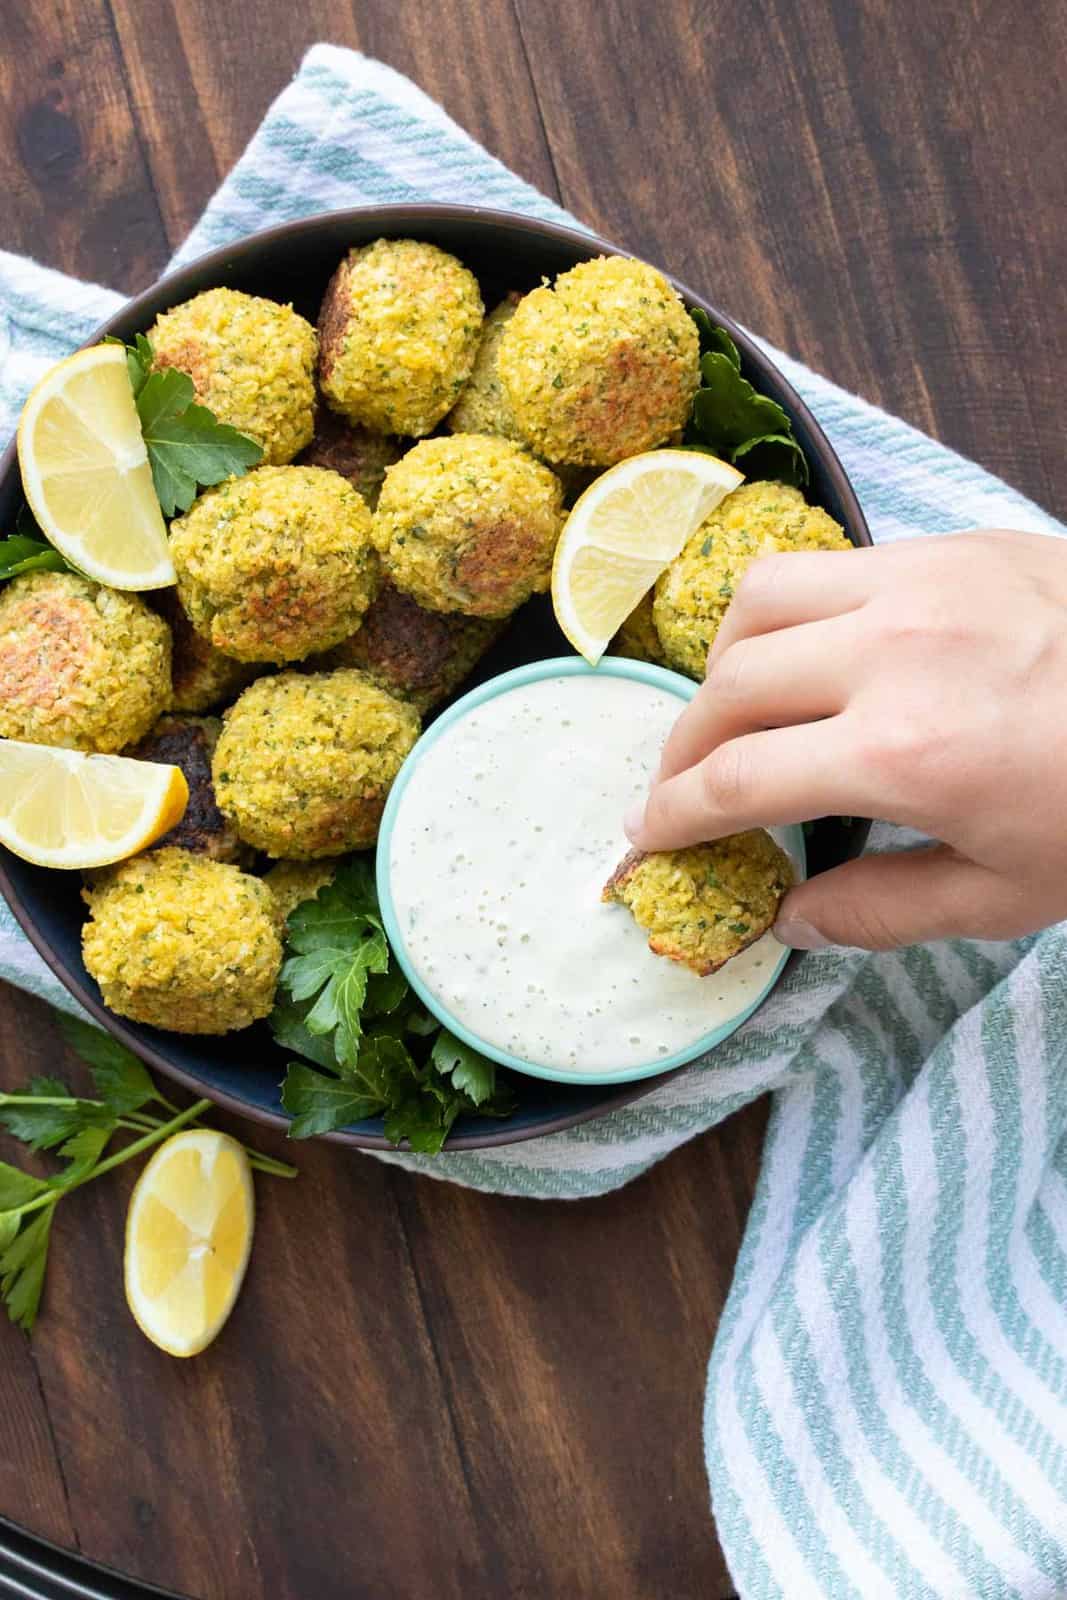 Hand dipping a falafel into a bowl of tahini sauce